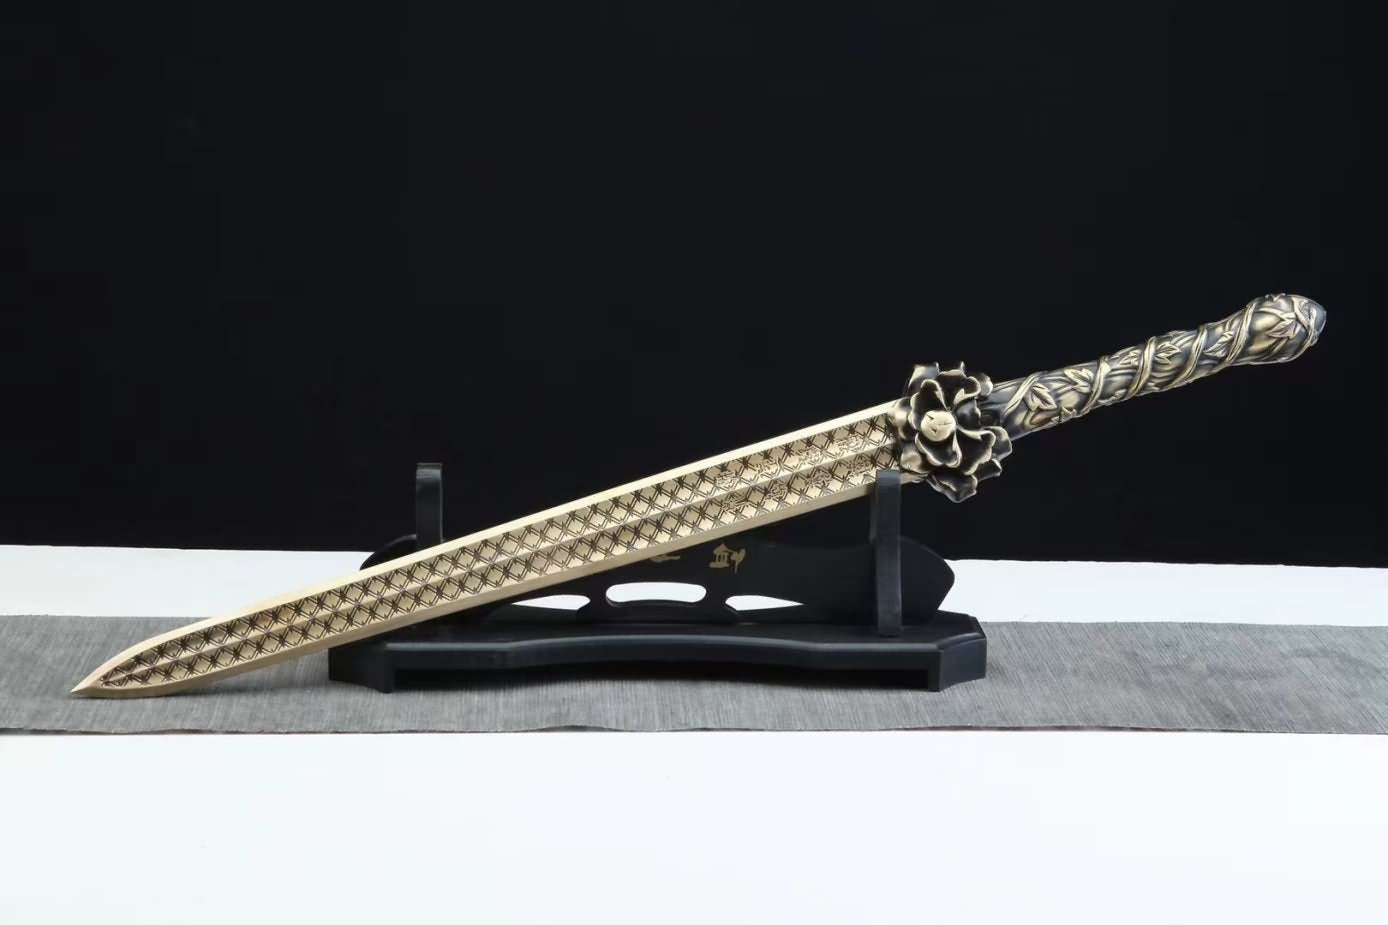 Spring and Autumn Period Bronze Sword,Collection,chinese swords,LOONGSWORD